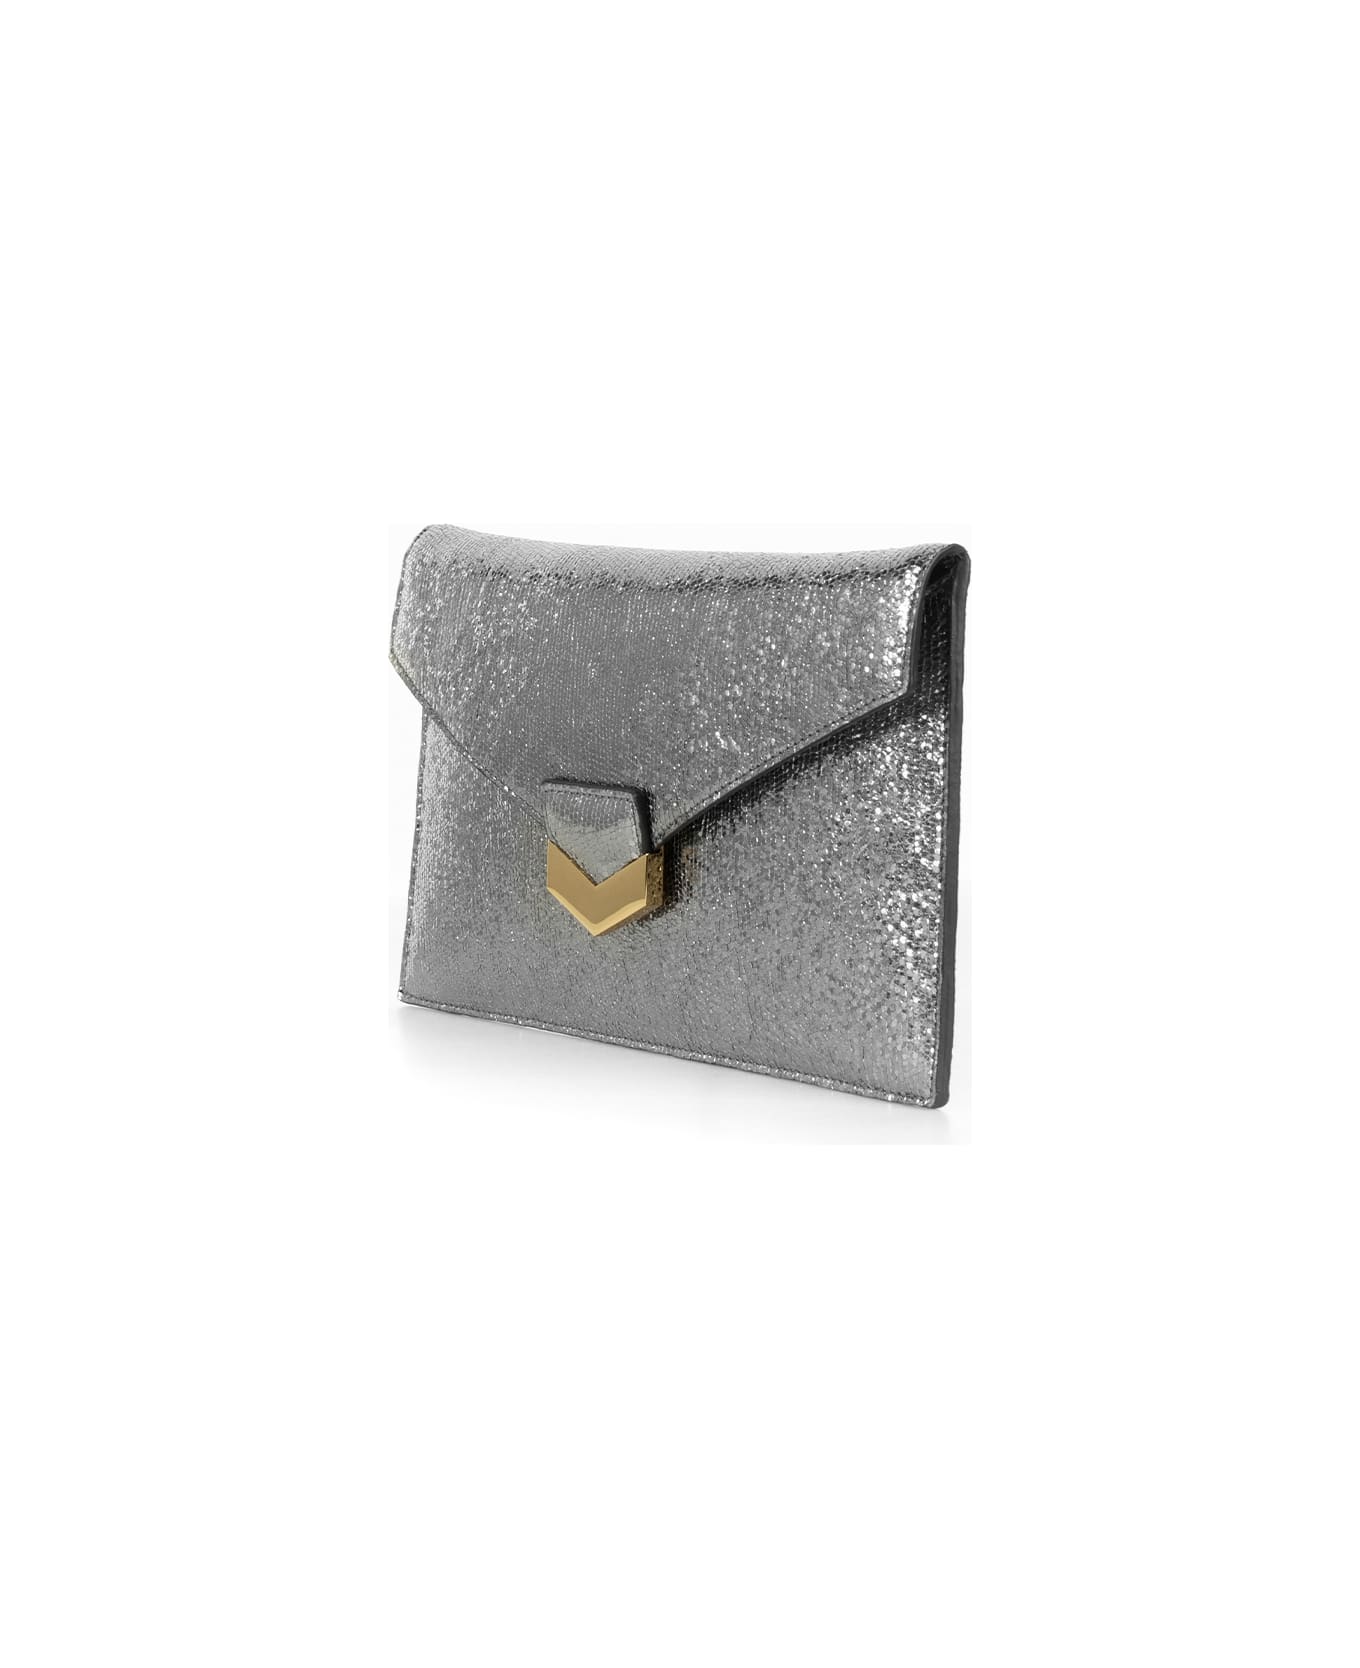 Demellier Leather Clutch Bag With Shoulder Strap - SILVER